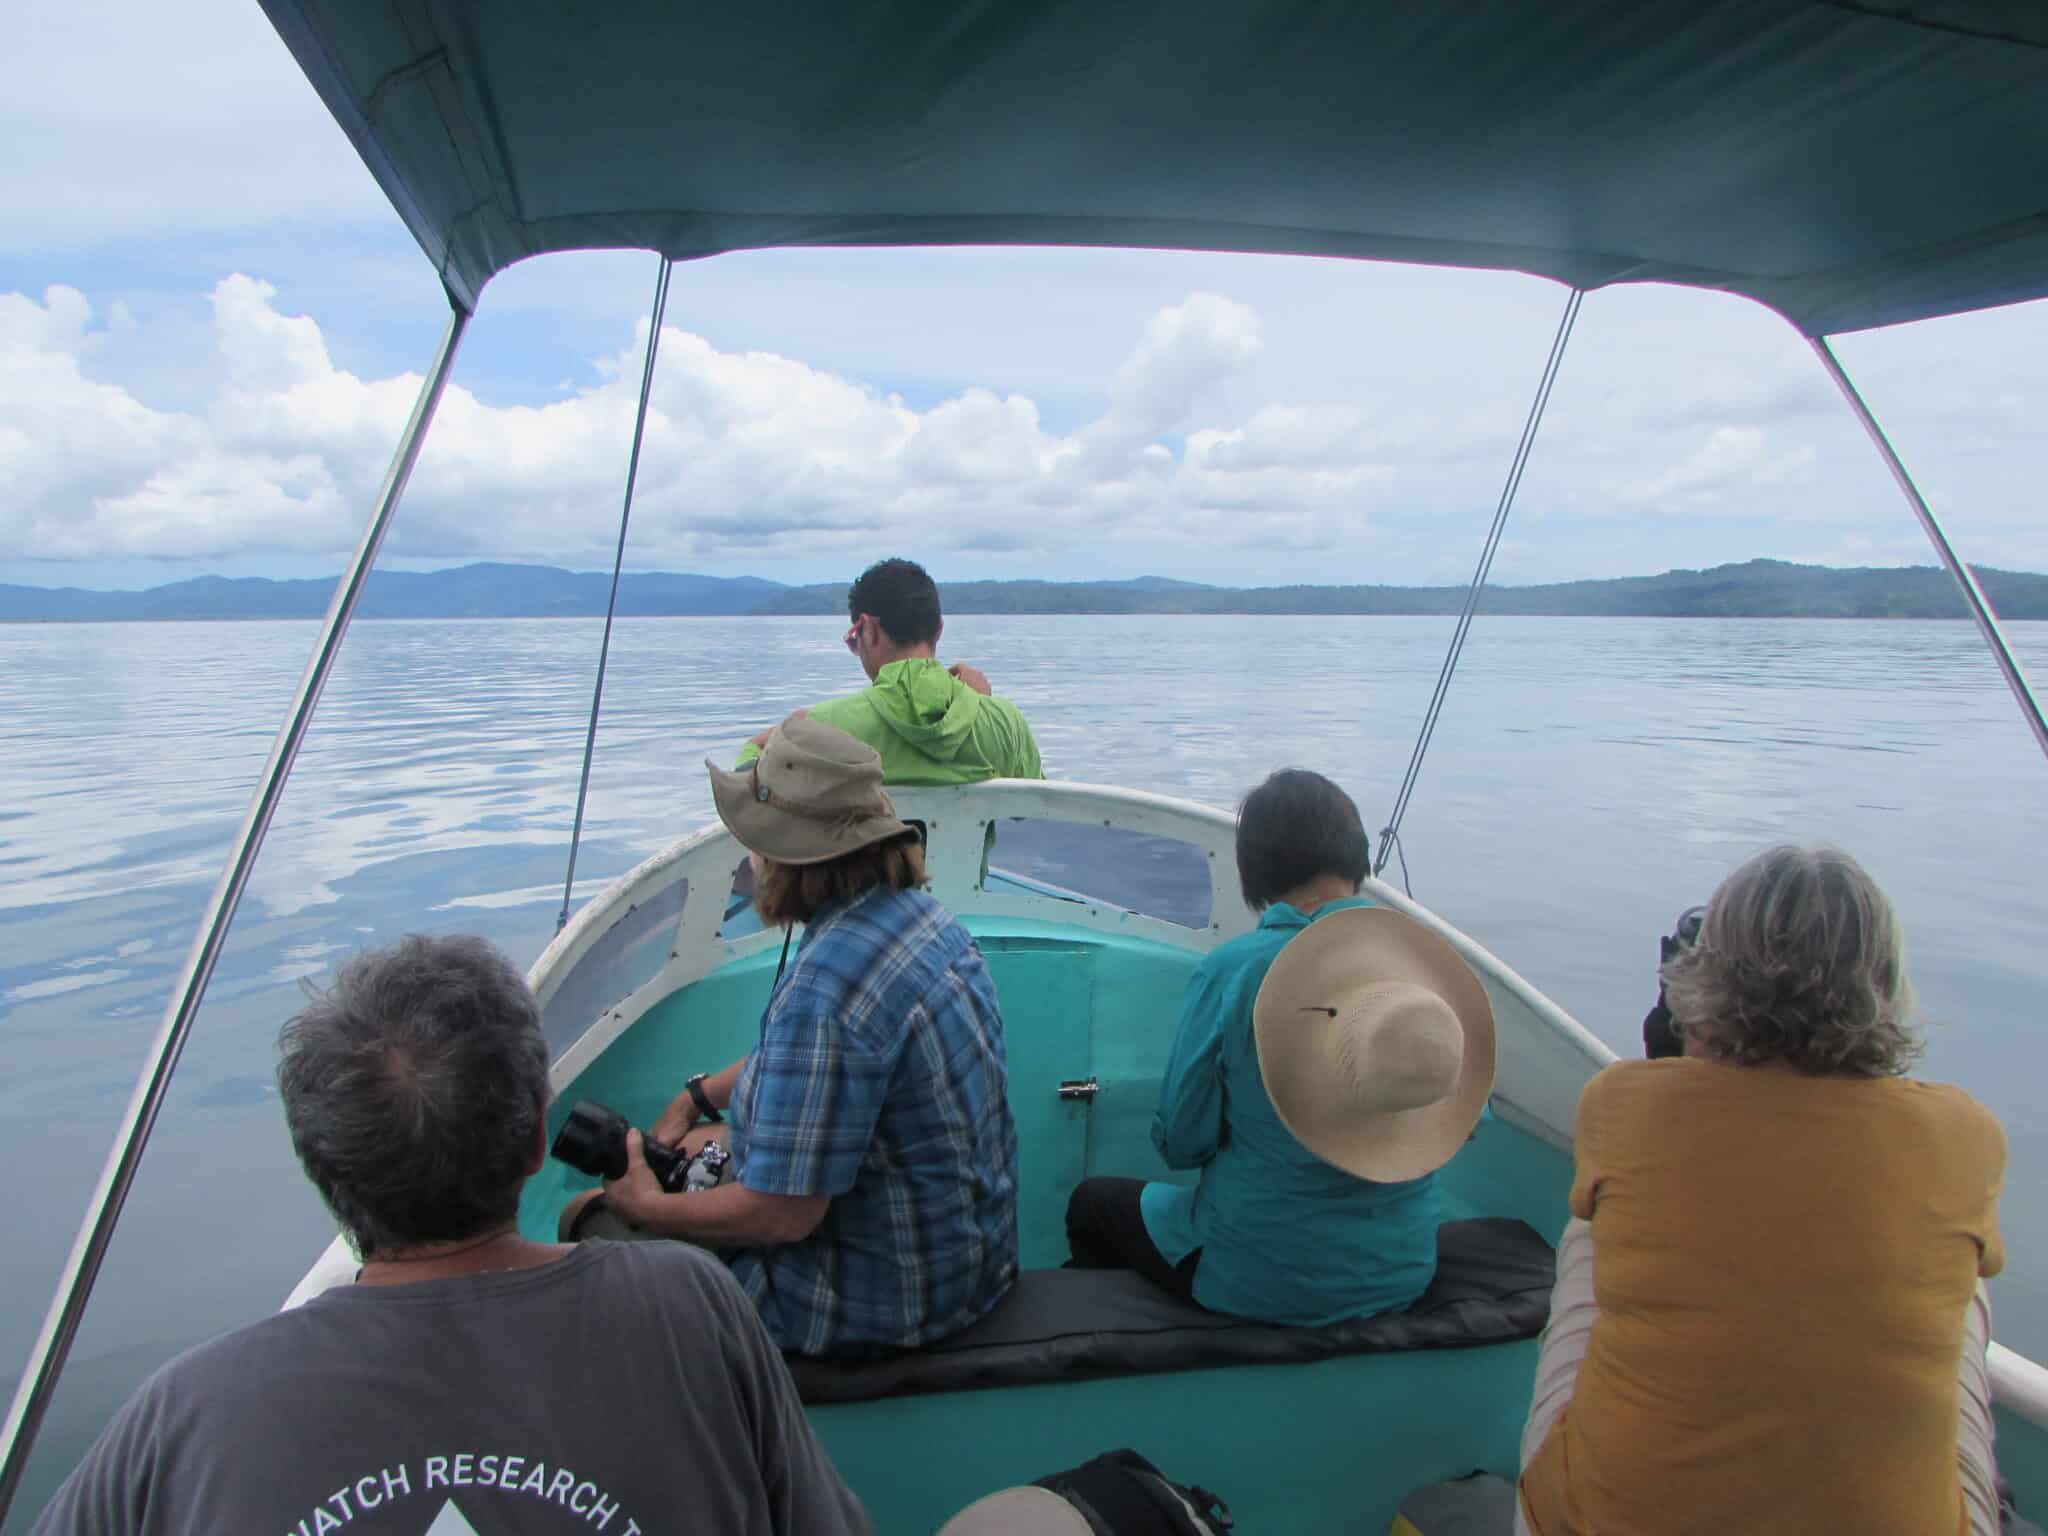 Earthwatch boat crew (Credit: CEIC)